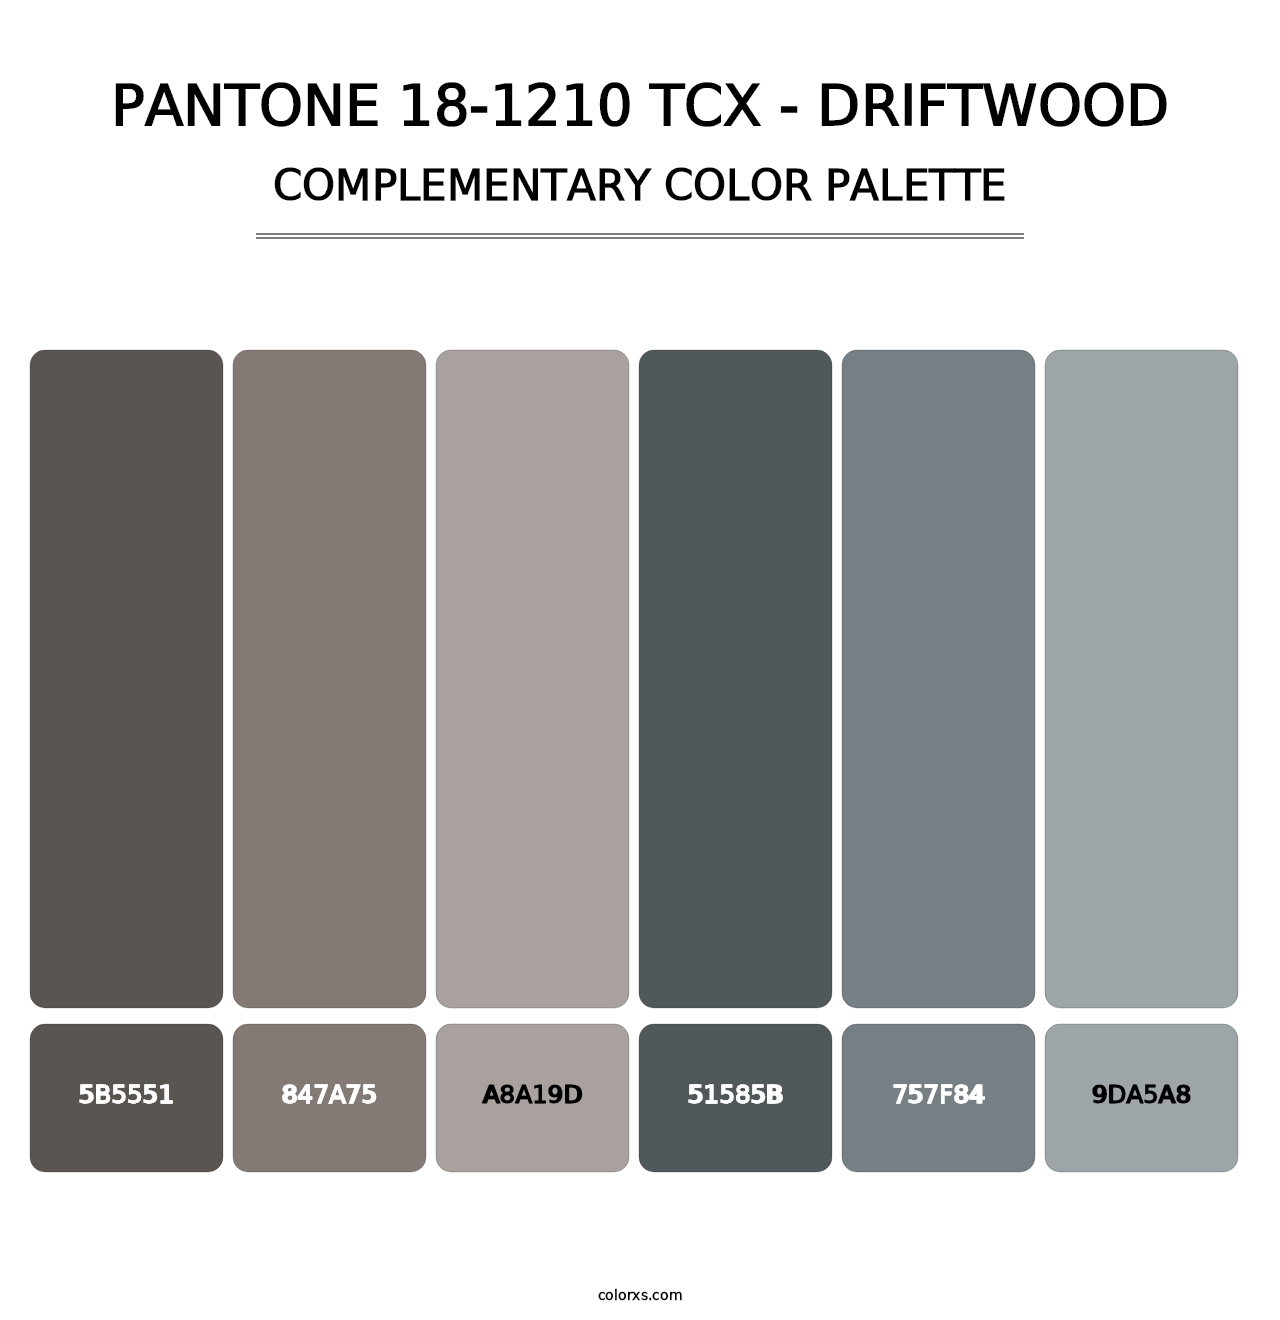 PANTONE 18-1210 TCX - Driftwood - Complementary Color Palette